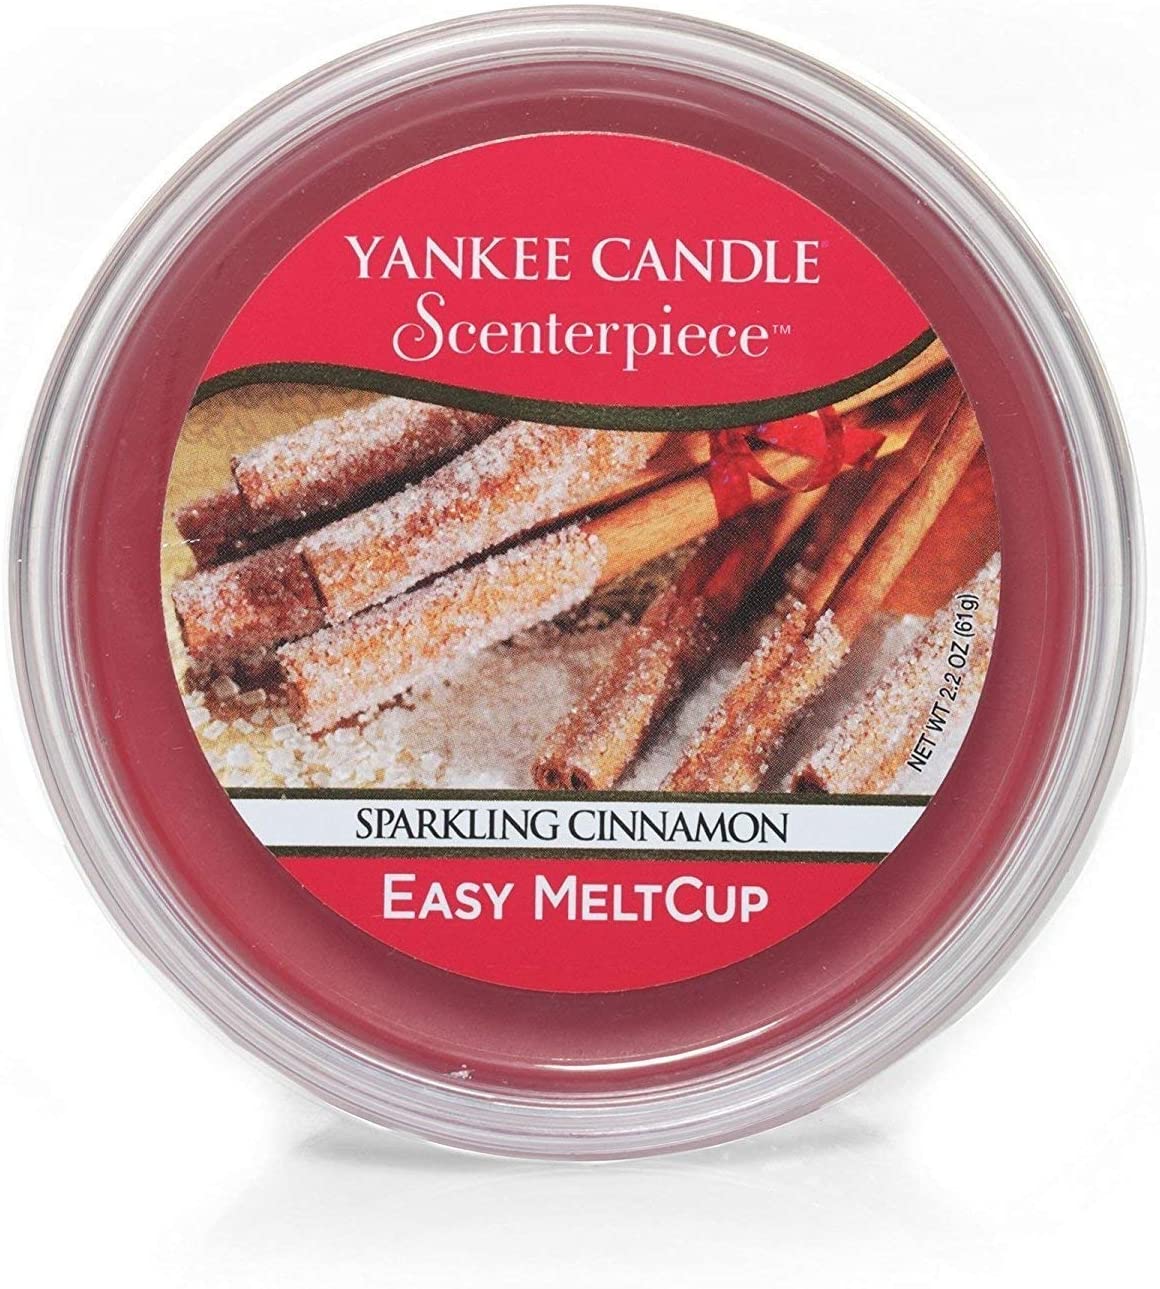 Yankee Candle - Scenterpiece Easy Melt Cup Sparkling Cinnamon ->